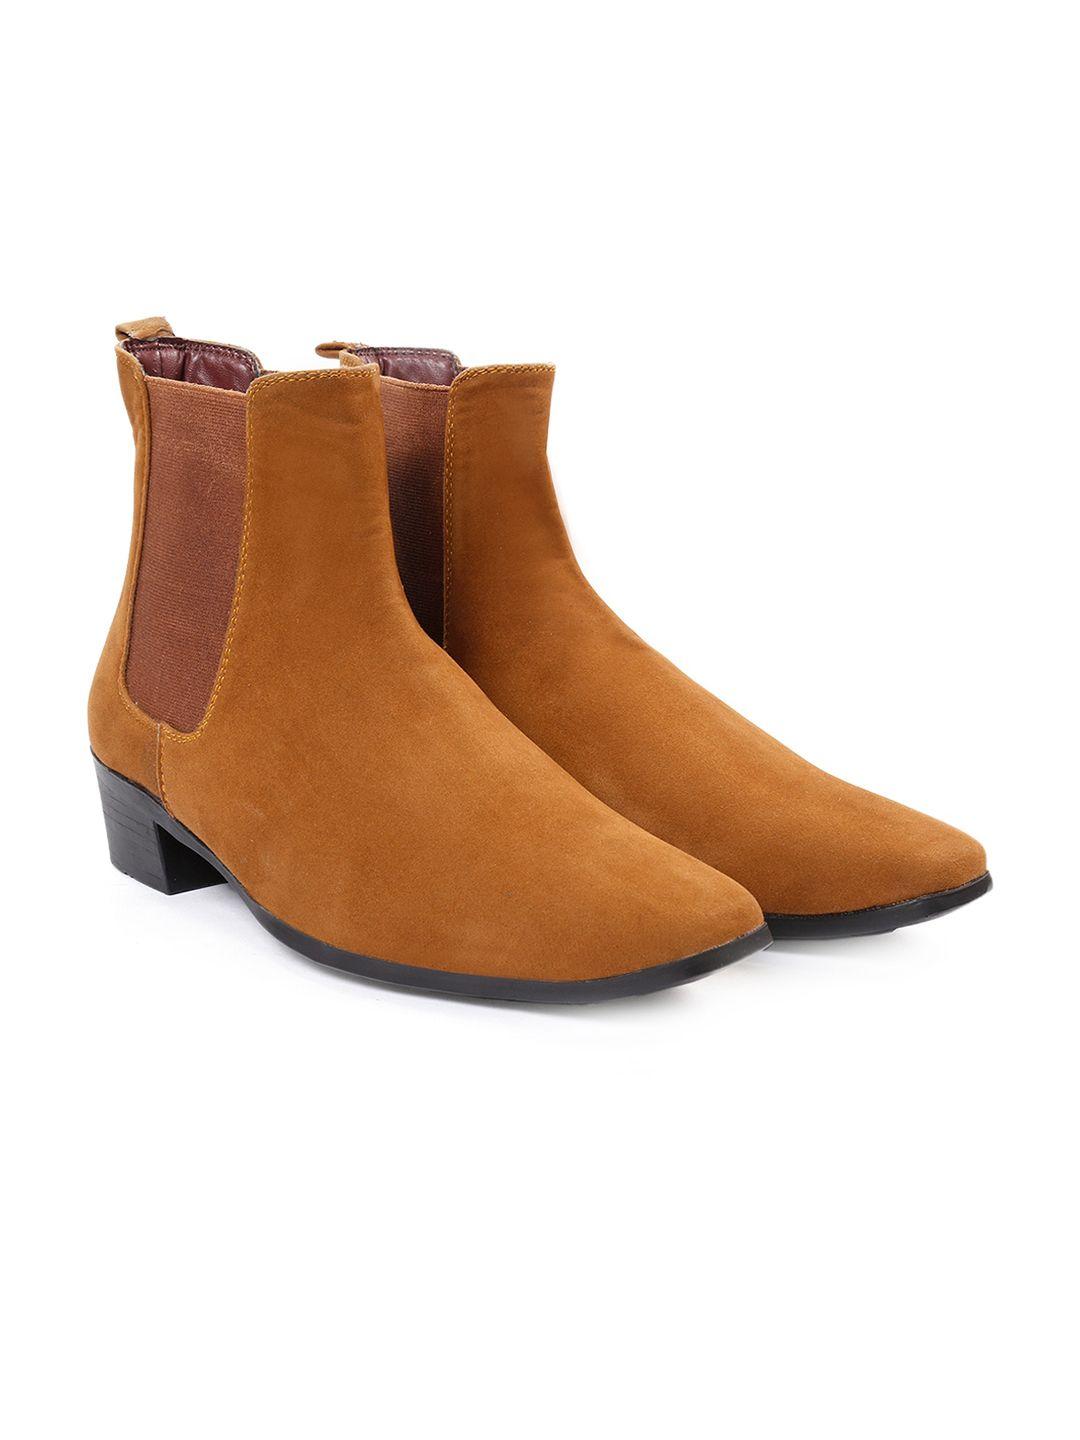 bxxy men height increasing casual chelsea block boots